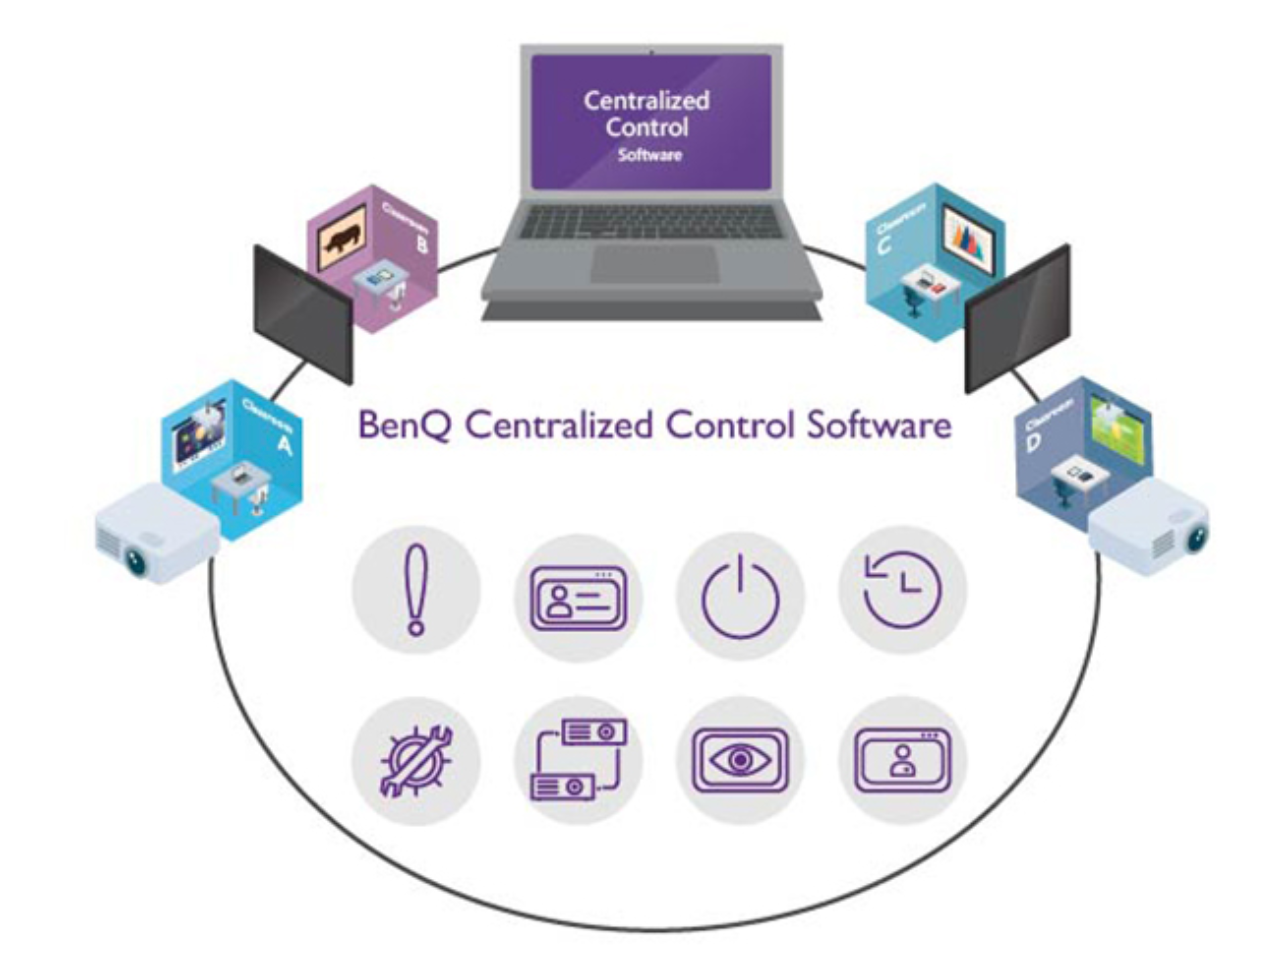 Centralized Control with BenQ Software